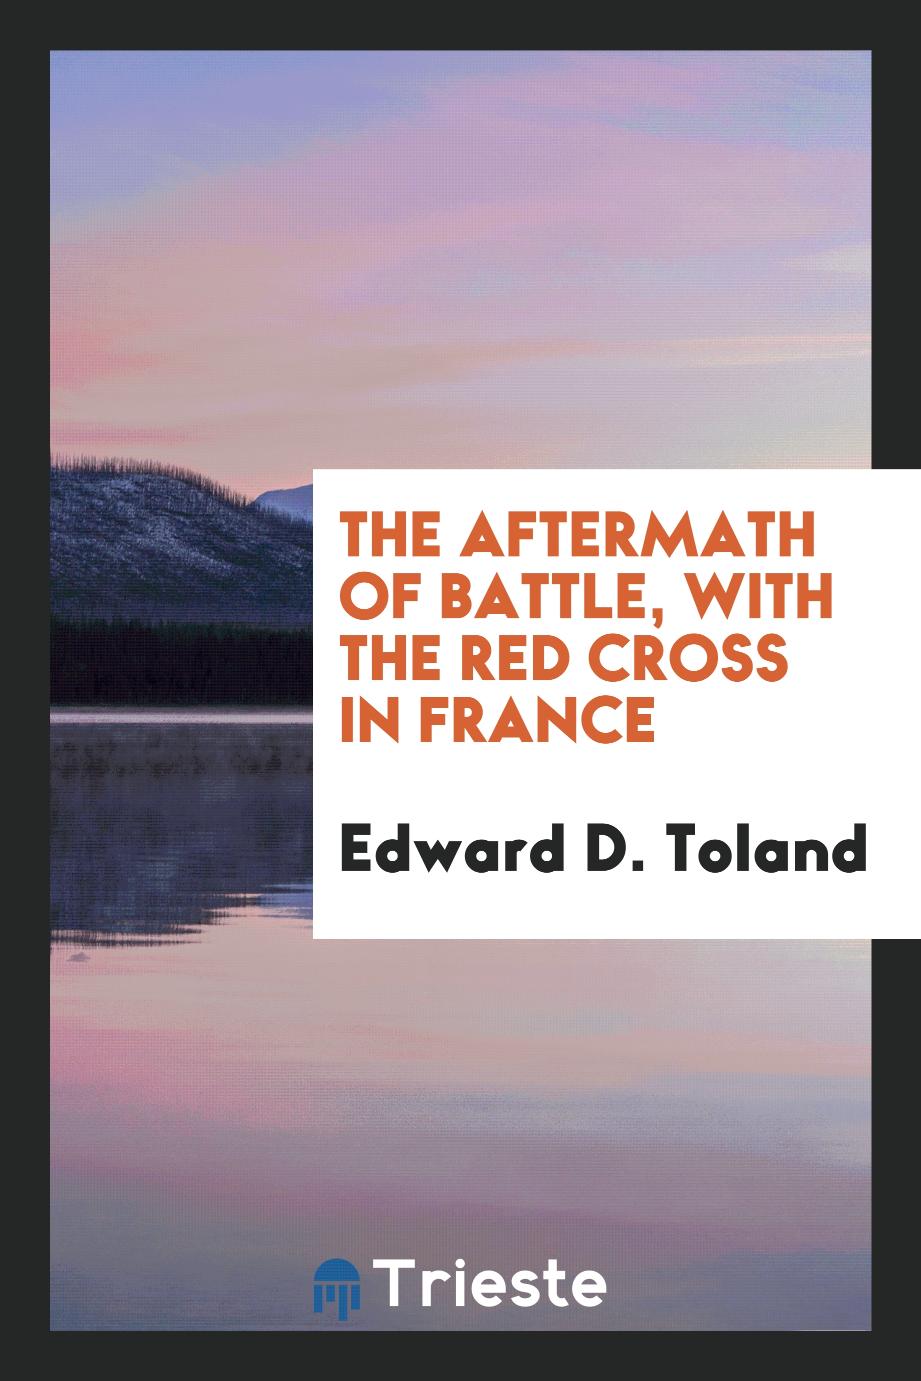 Edward D. Toland - The aftermath of battle, with the Red Cross in France